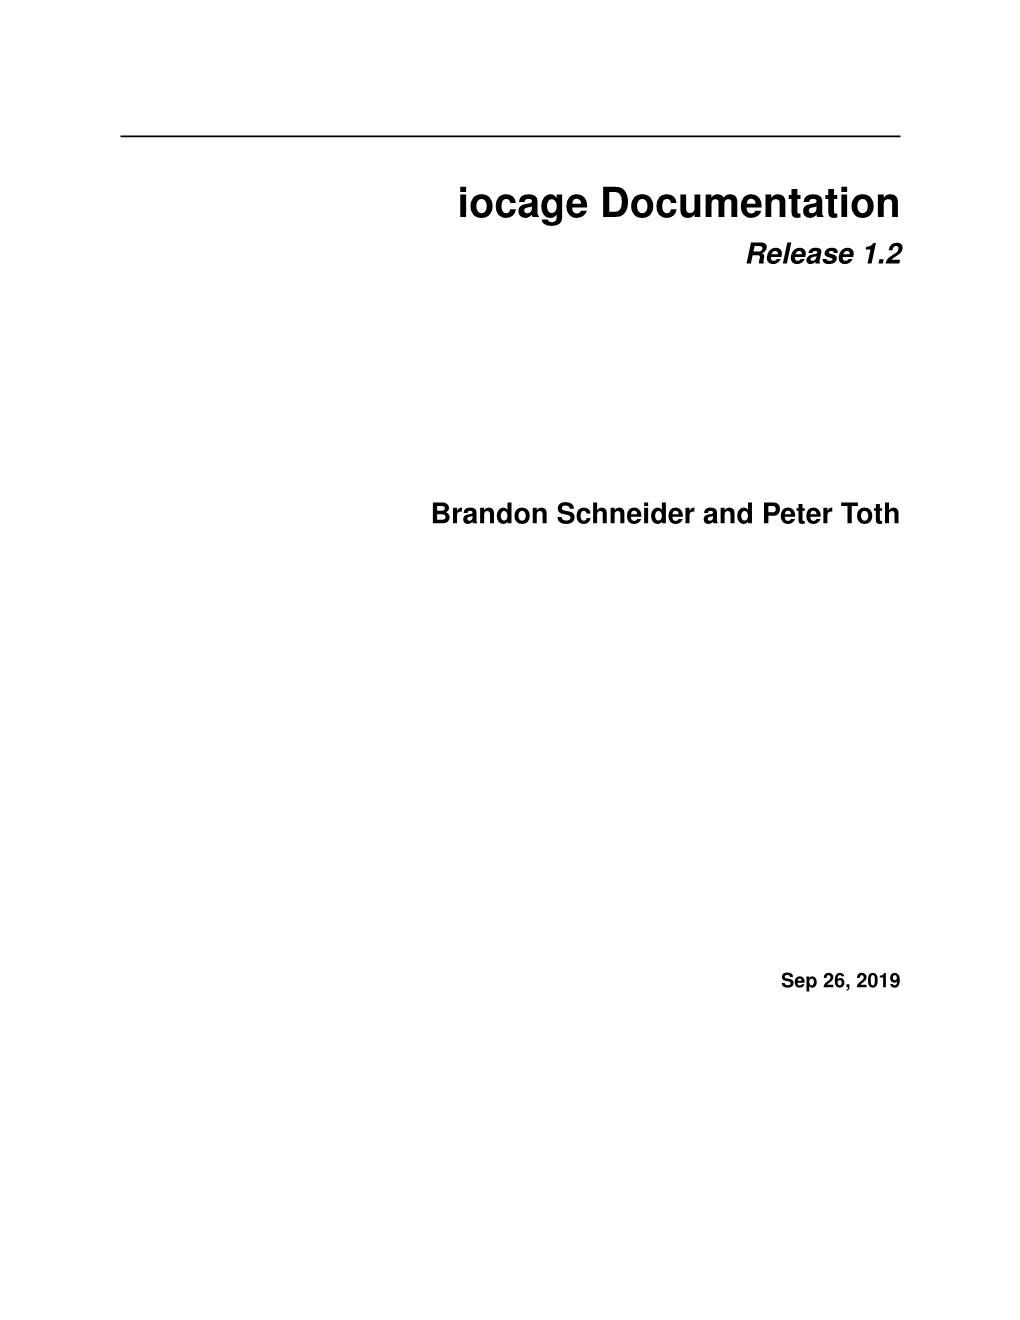 Iocage Documentation Release 1.2